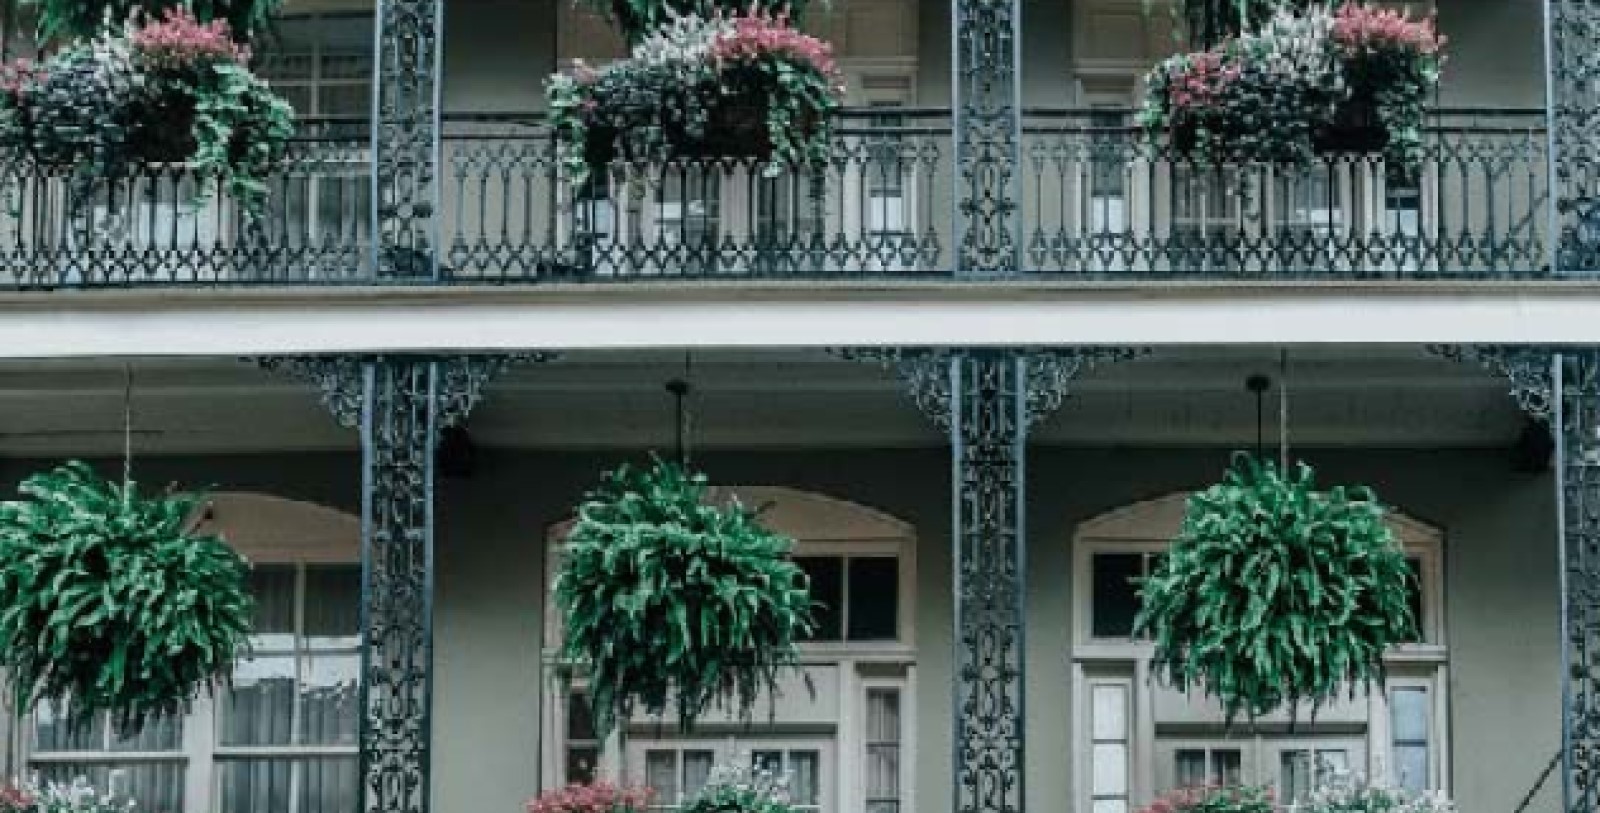 Experience Jean Lafitte National Historic Park, the House of Blues New Orleans, Bourbon Street, and Café Du Monde just a short walk away.